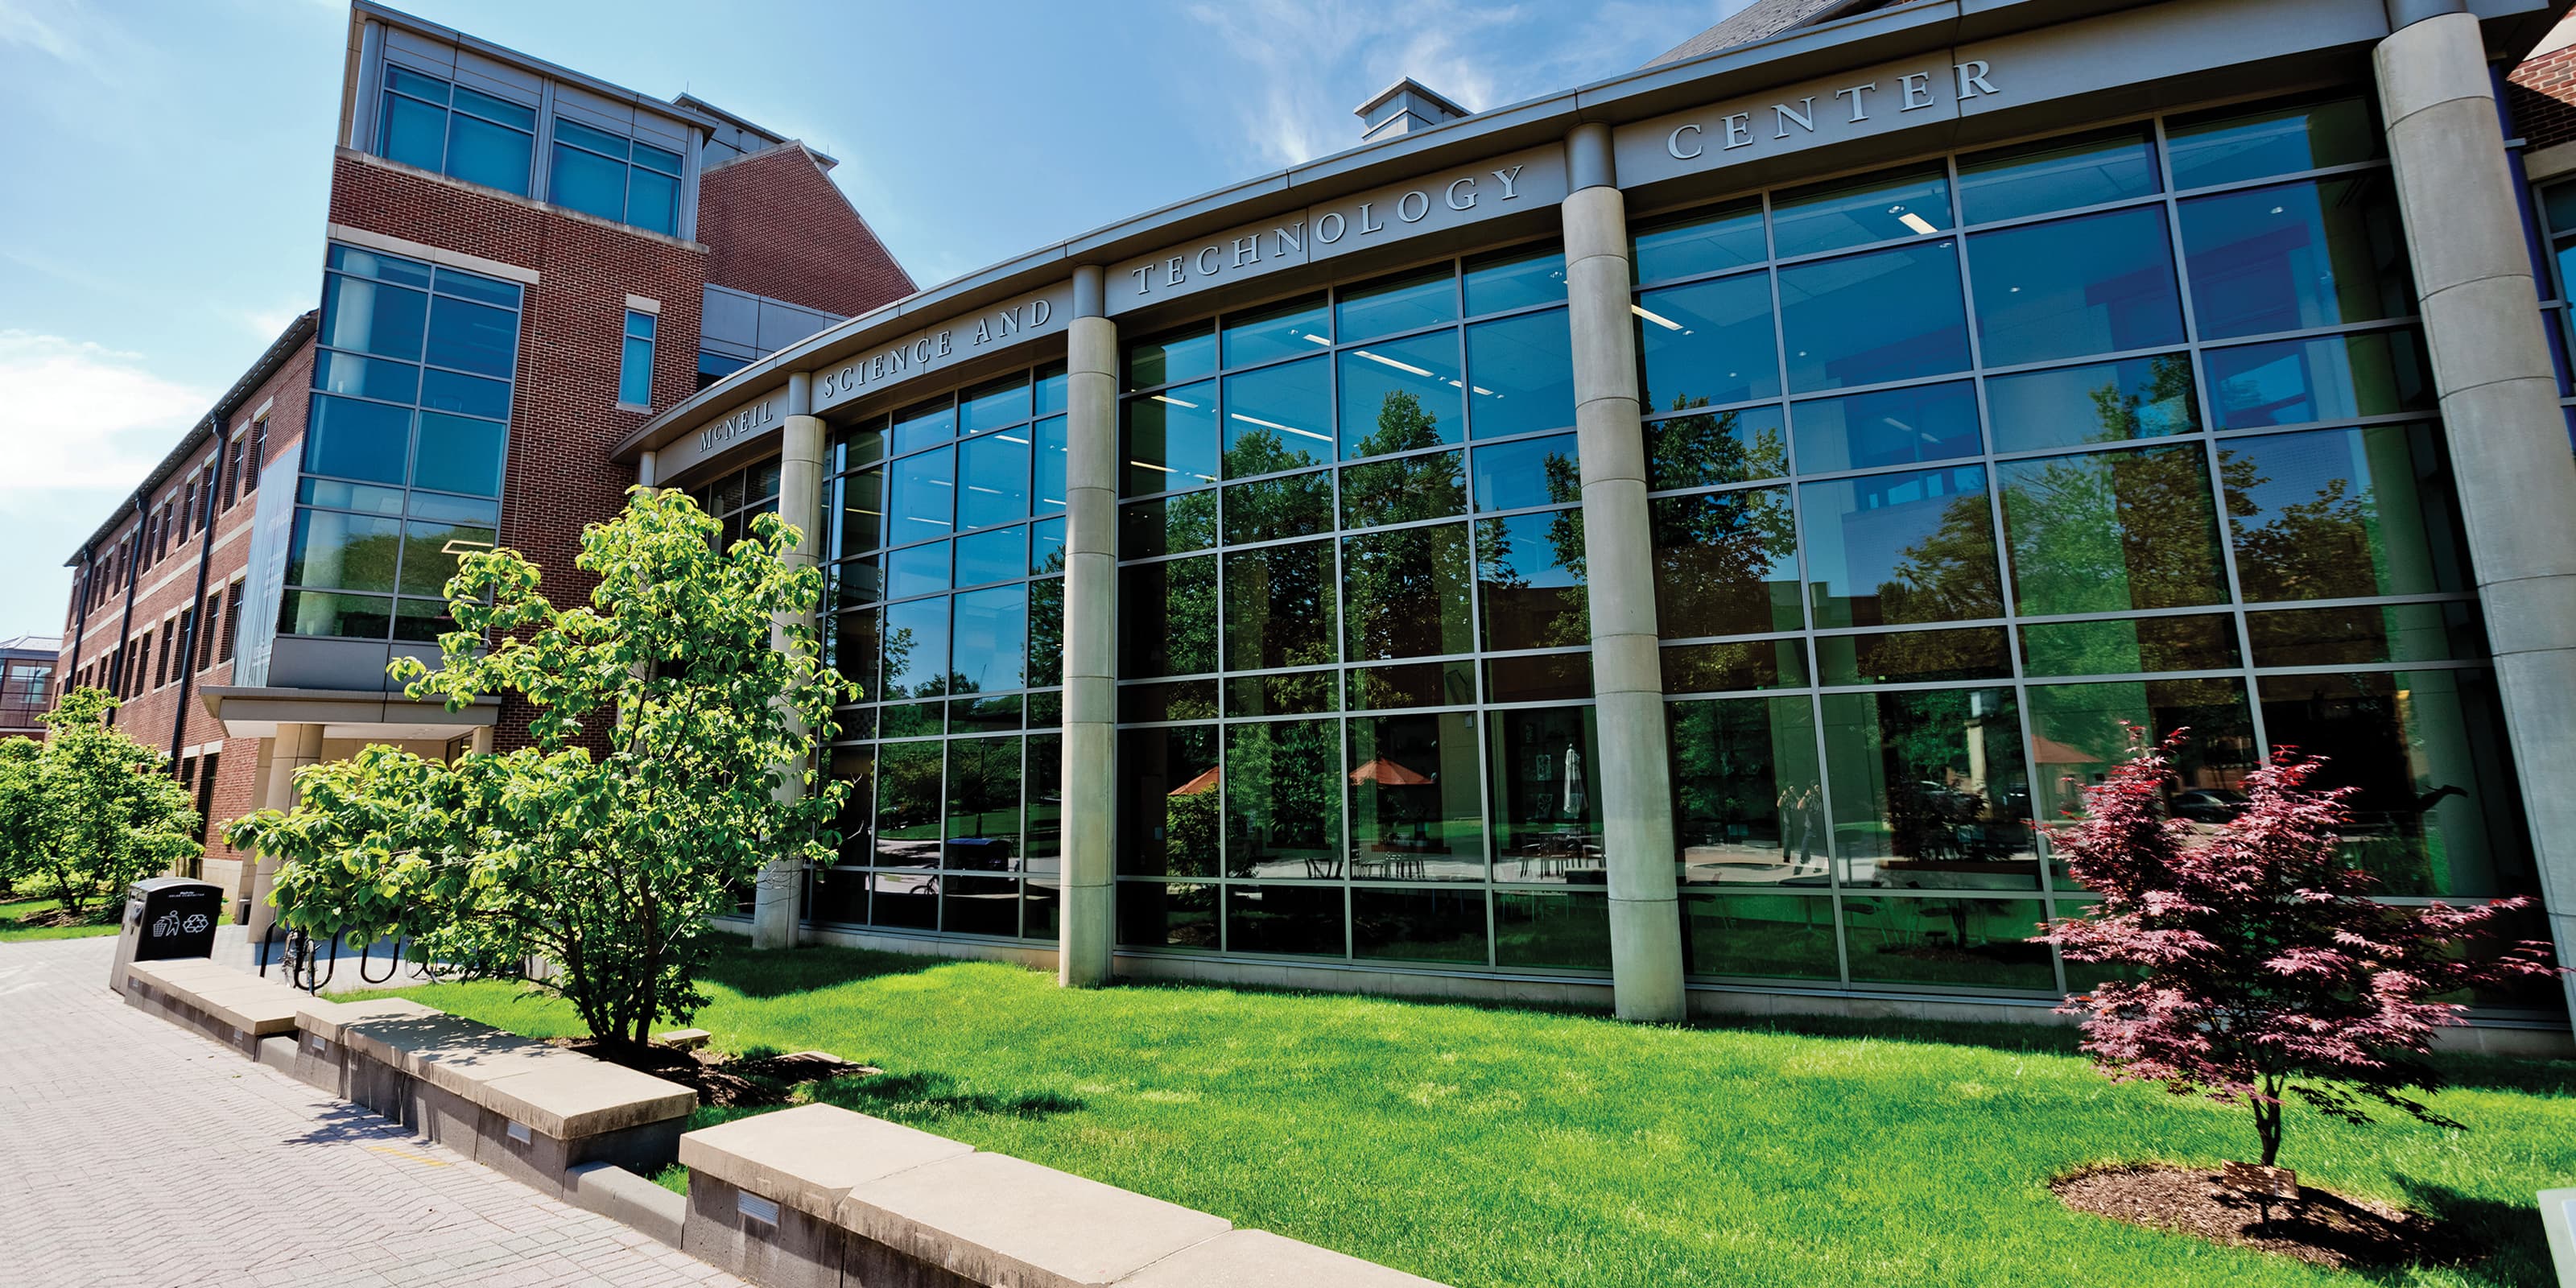 The McNeil Science and Technology Center (STC) at Saint Joseph's University